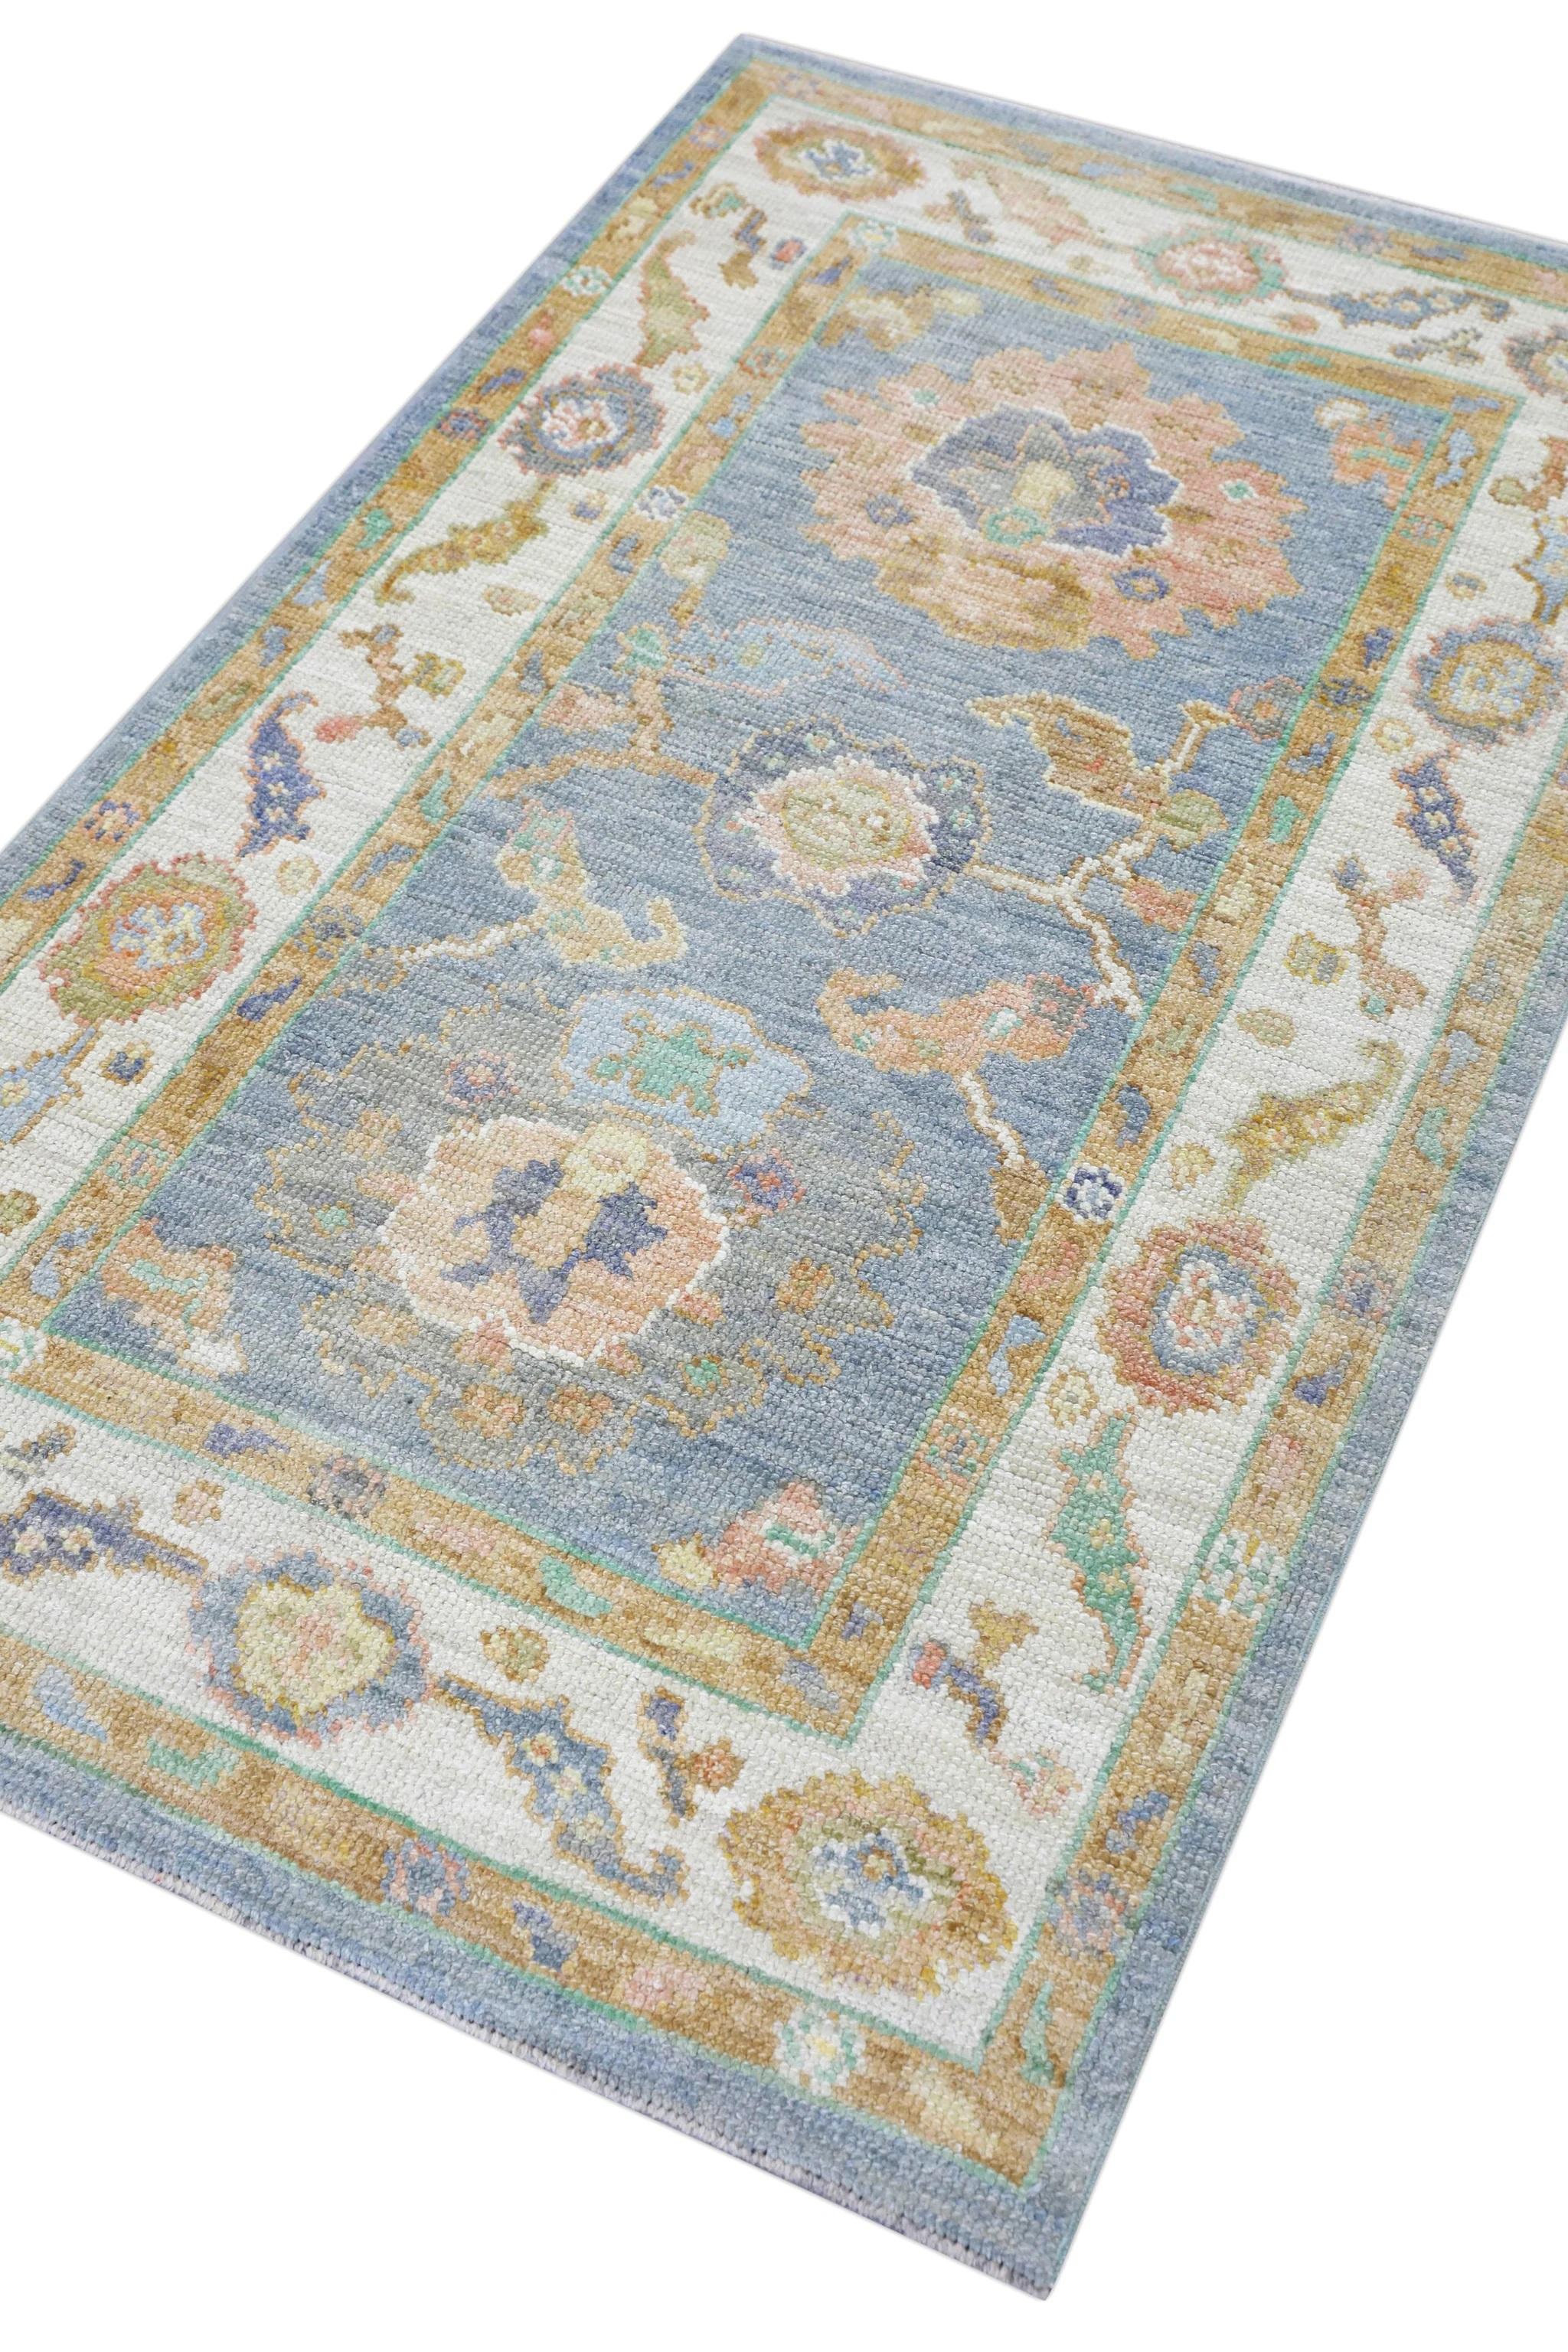 Floral Handwoven Wool Turkish Oushak Rug with Blue Field Yellow Border 2'11 X 5' For Sale 3